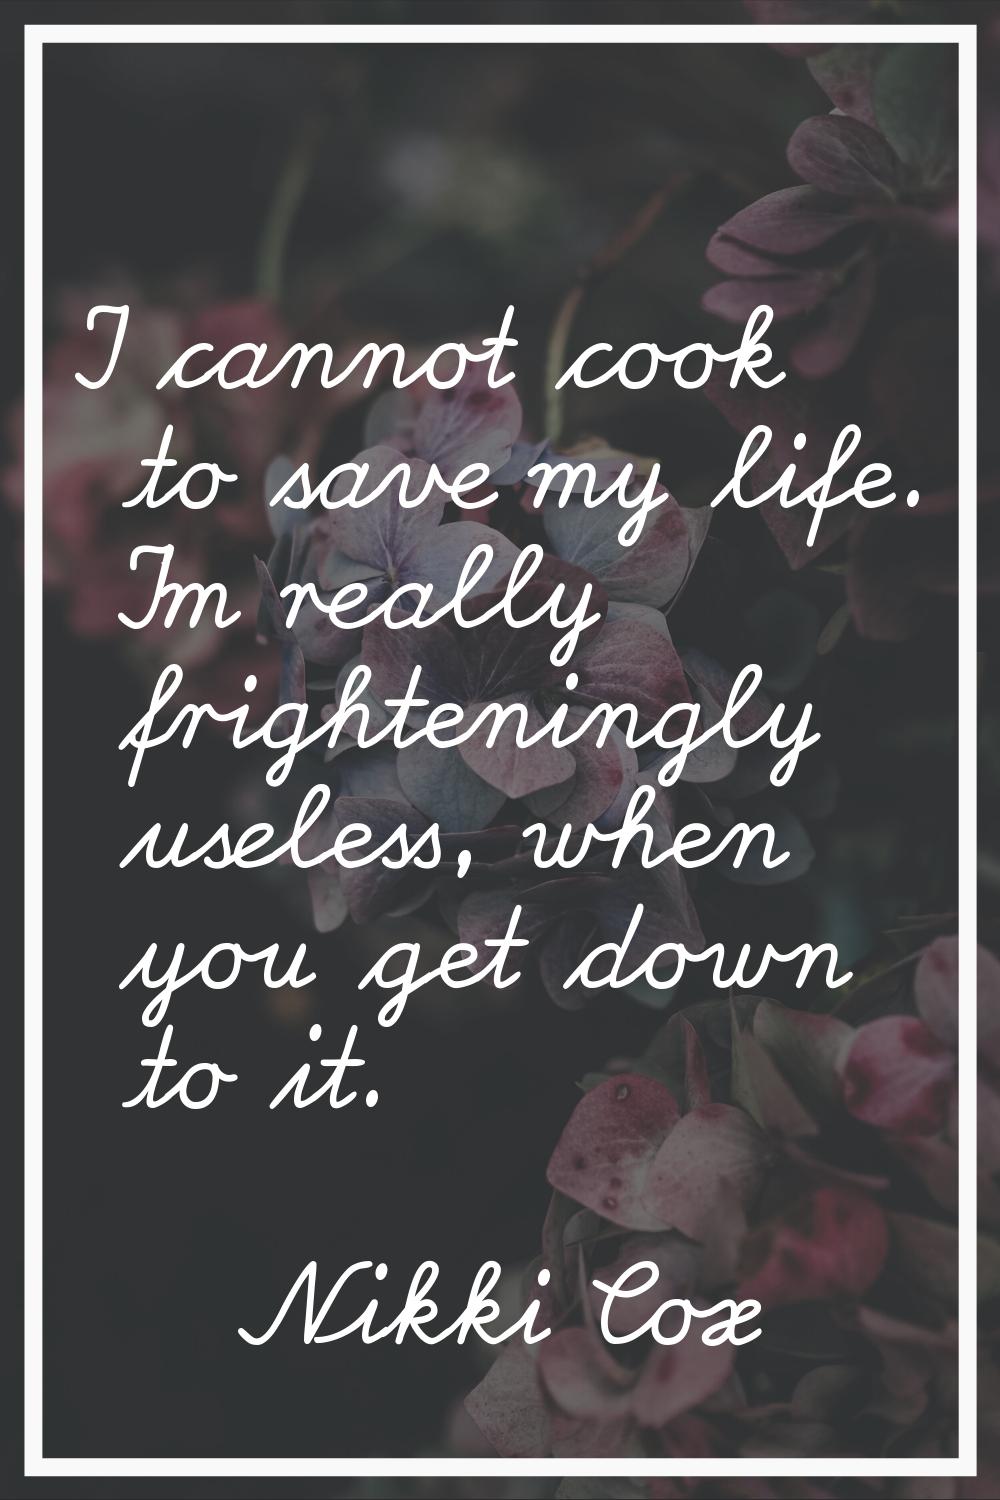 I cannot cook to save my life. I'm really frighteningly useless, when you get down to it.